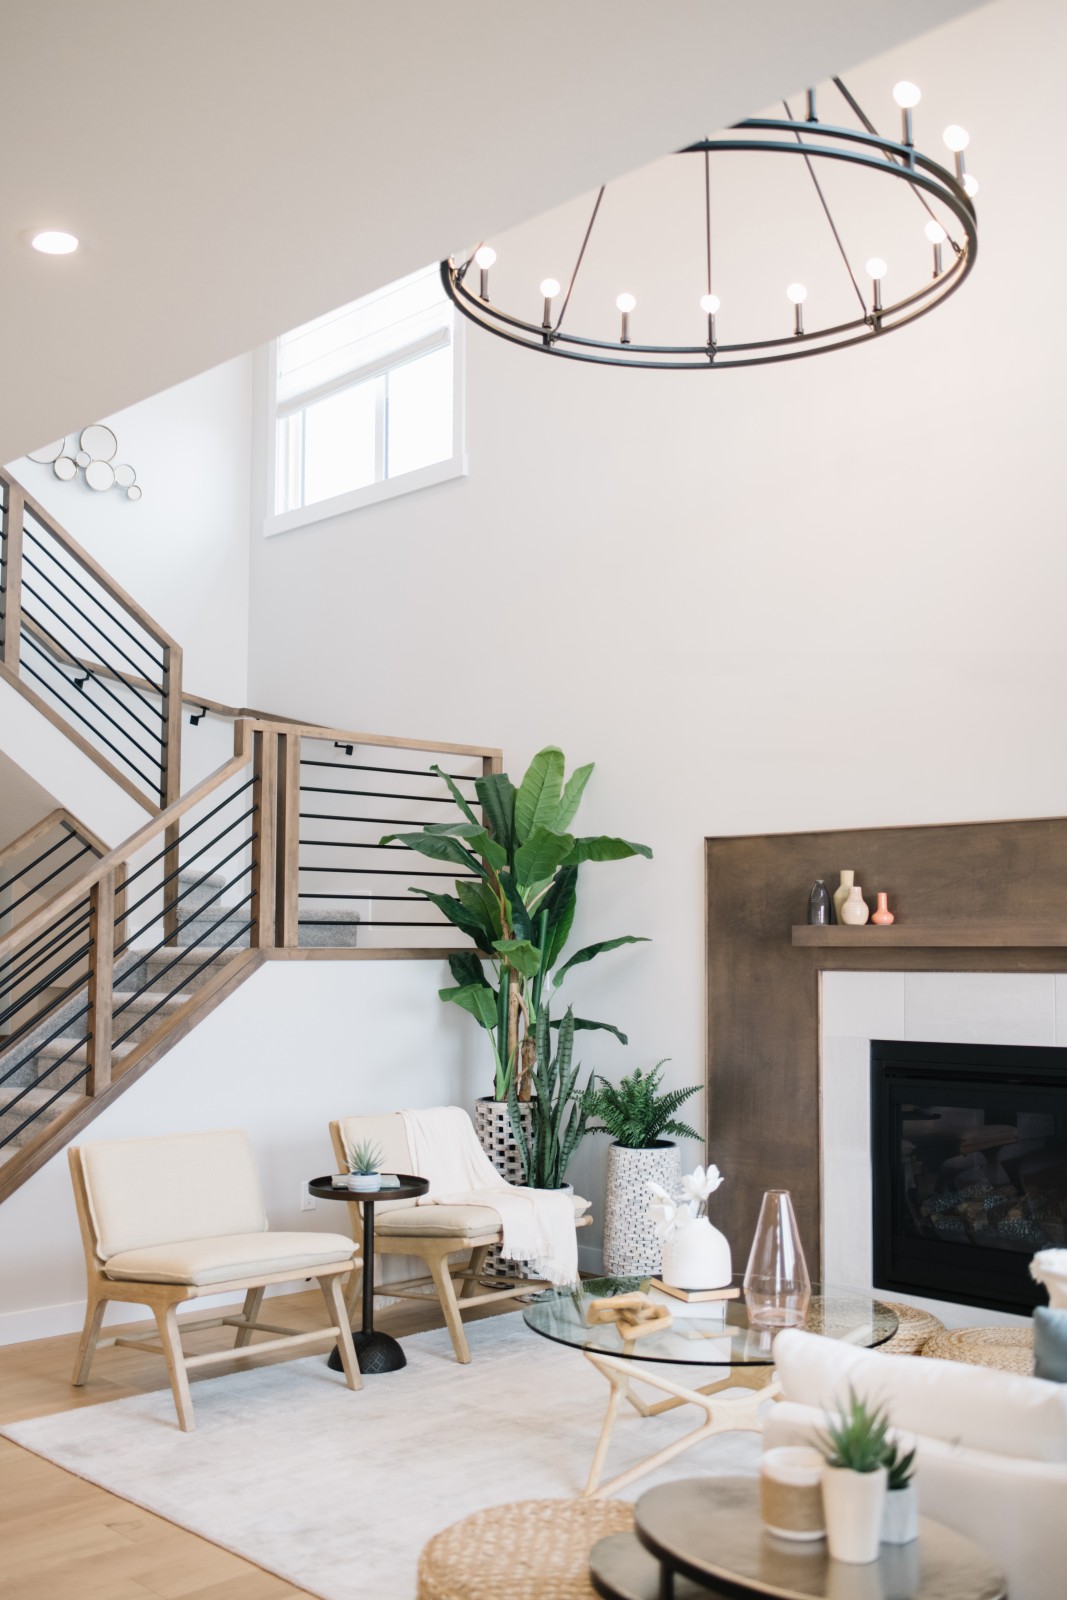 Looking at the open to above great room of the Nysa showhome, a large round, black iron chandelier can be seen in the top corner of the photo. The fireplace with warm wood surround is to the right of the stained wood railing with black horizontal spindles leading to the second floor.